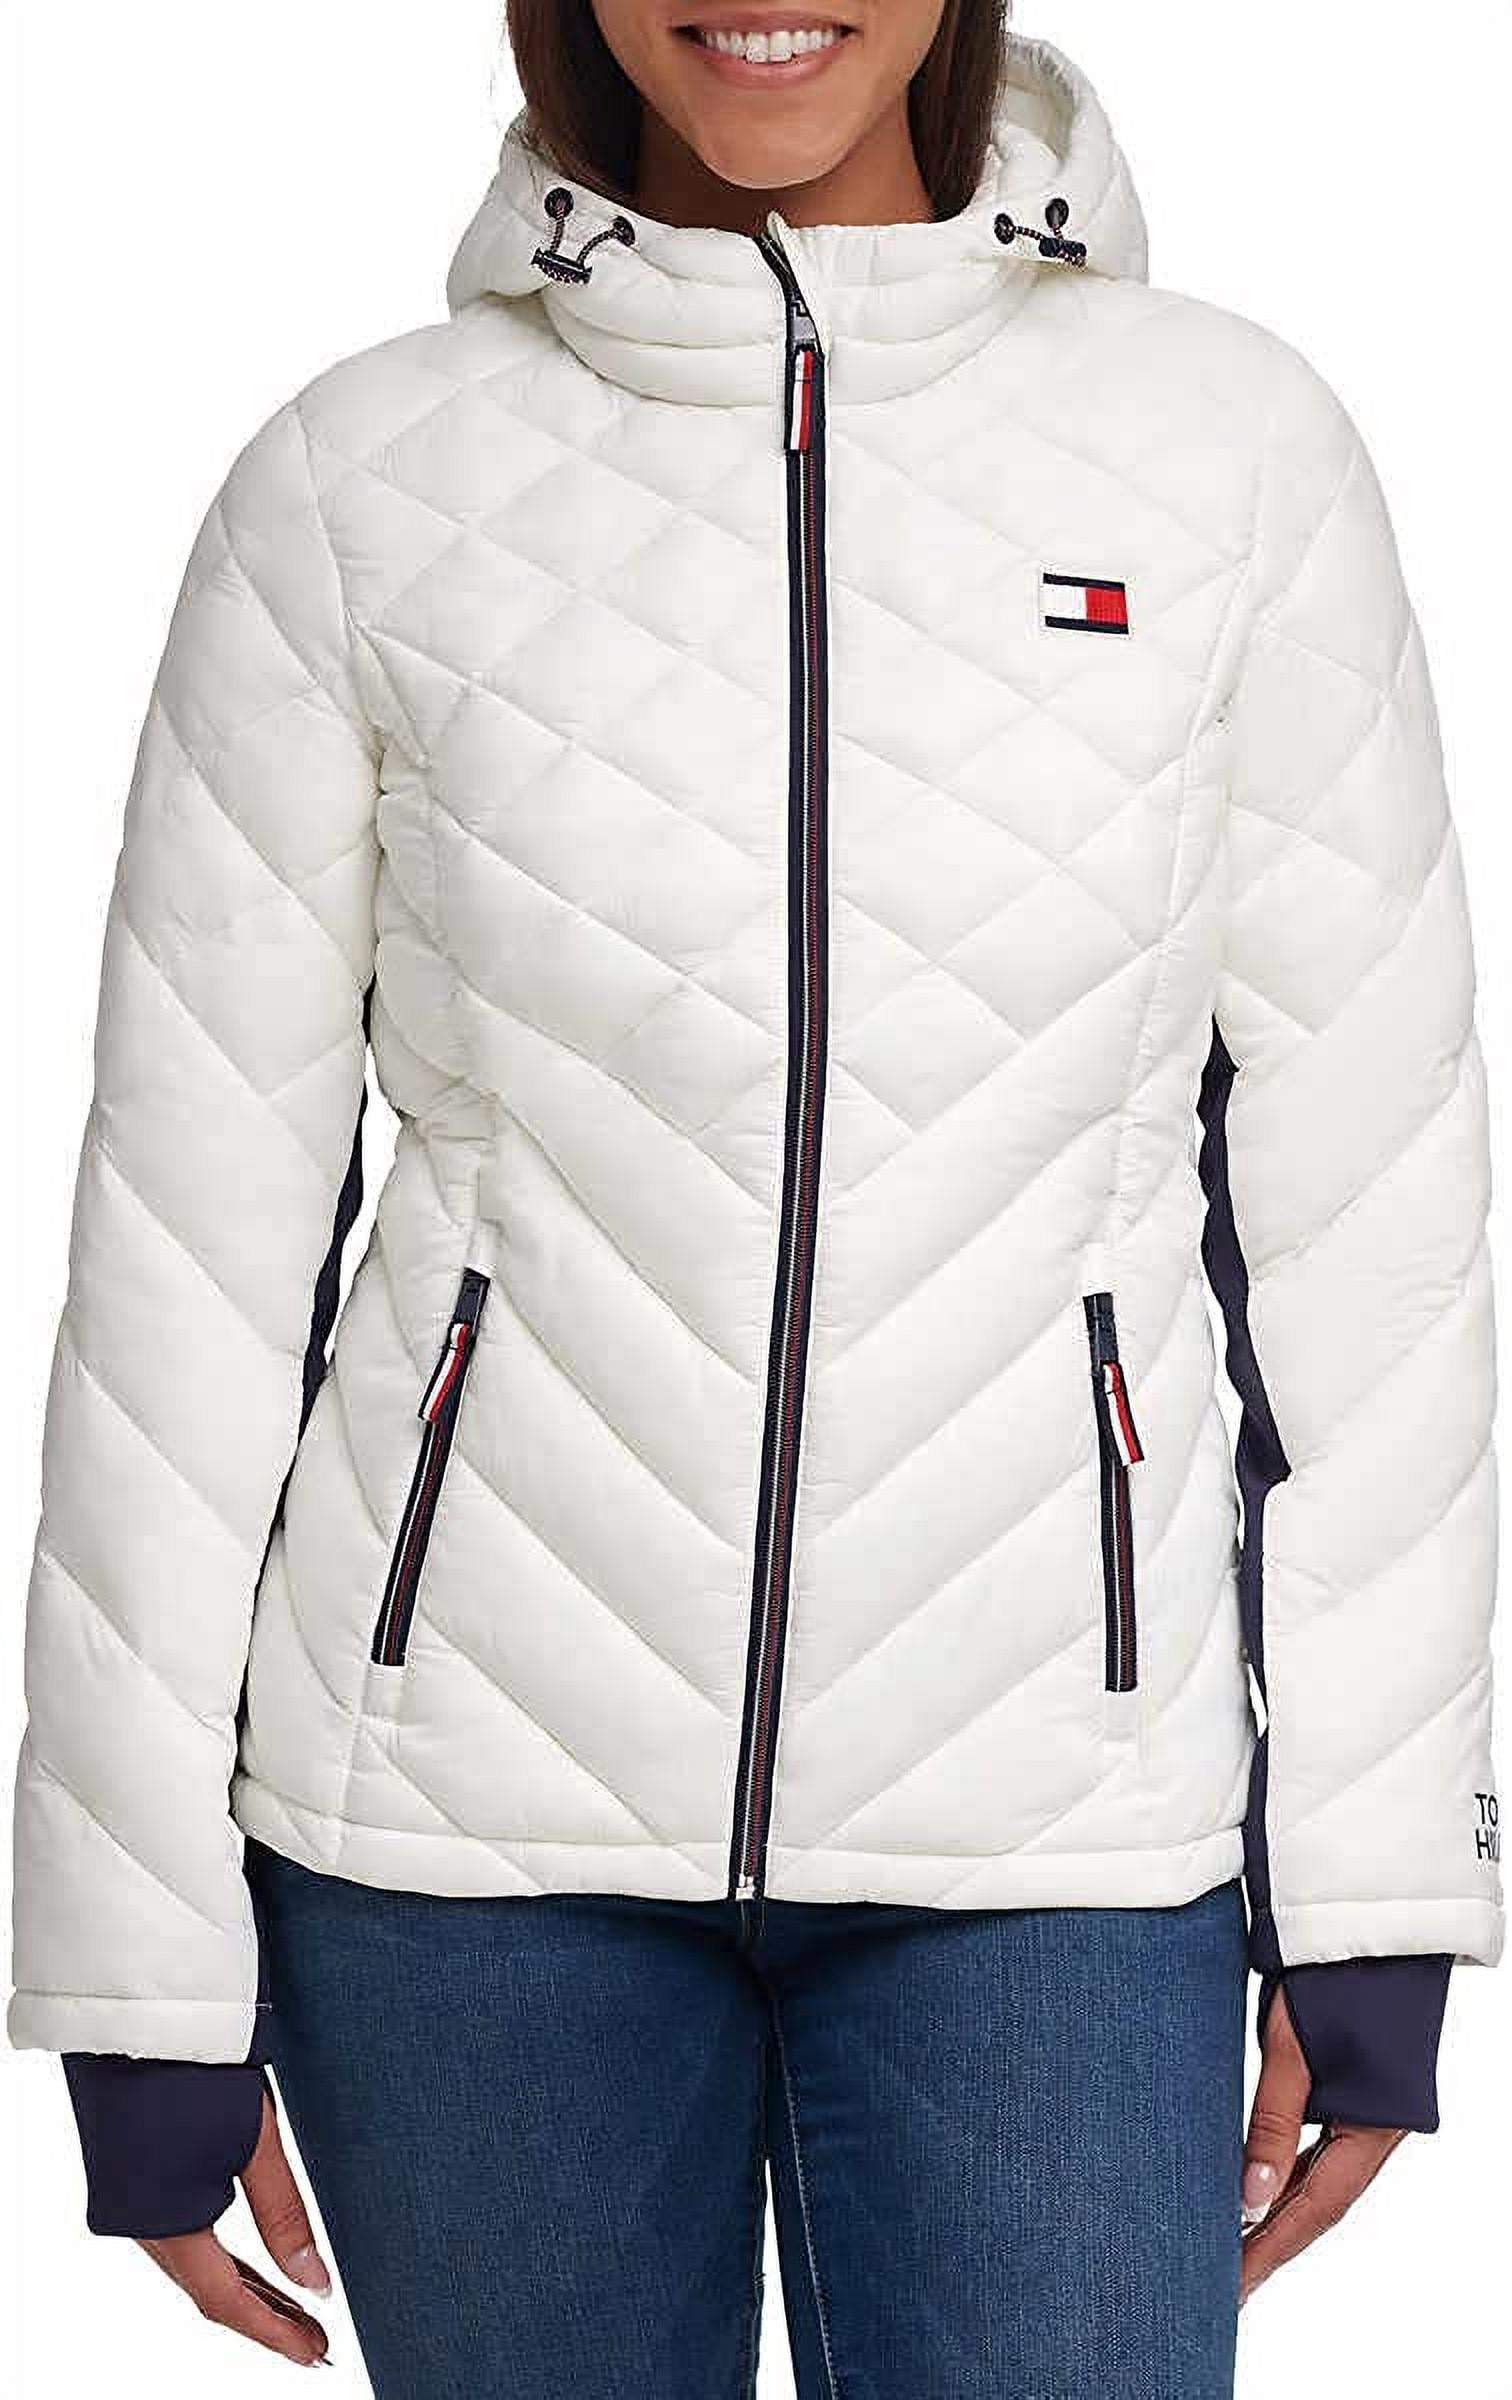 Tommy Hilfiger Womens Packable Hooded Puffer Jacket(White,XL)